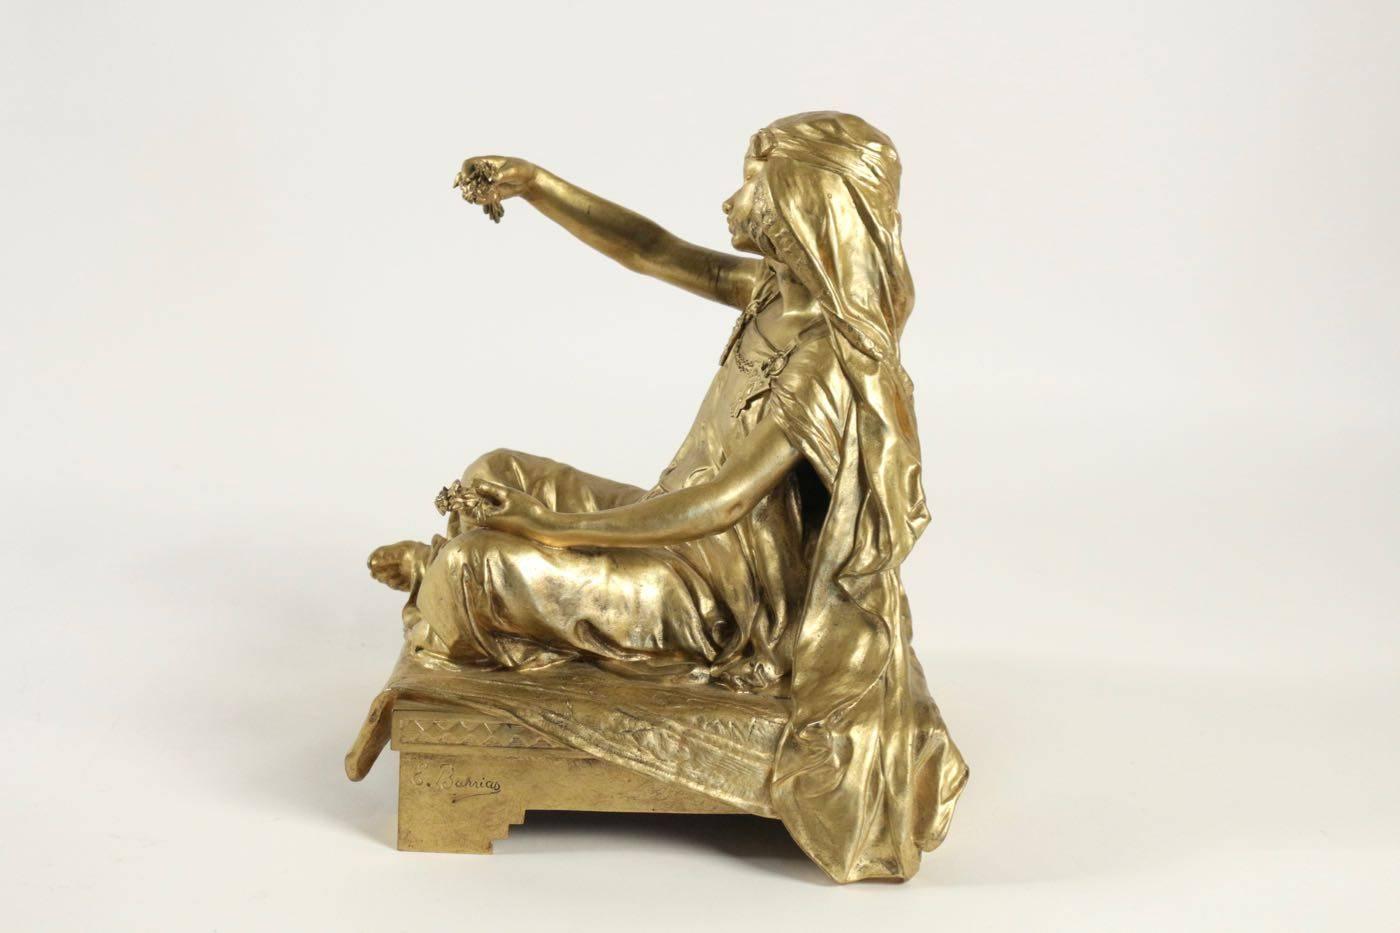 Early 20th Century Bronze by Louis Ernest Barrias, “Little Girl Seated”